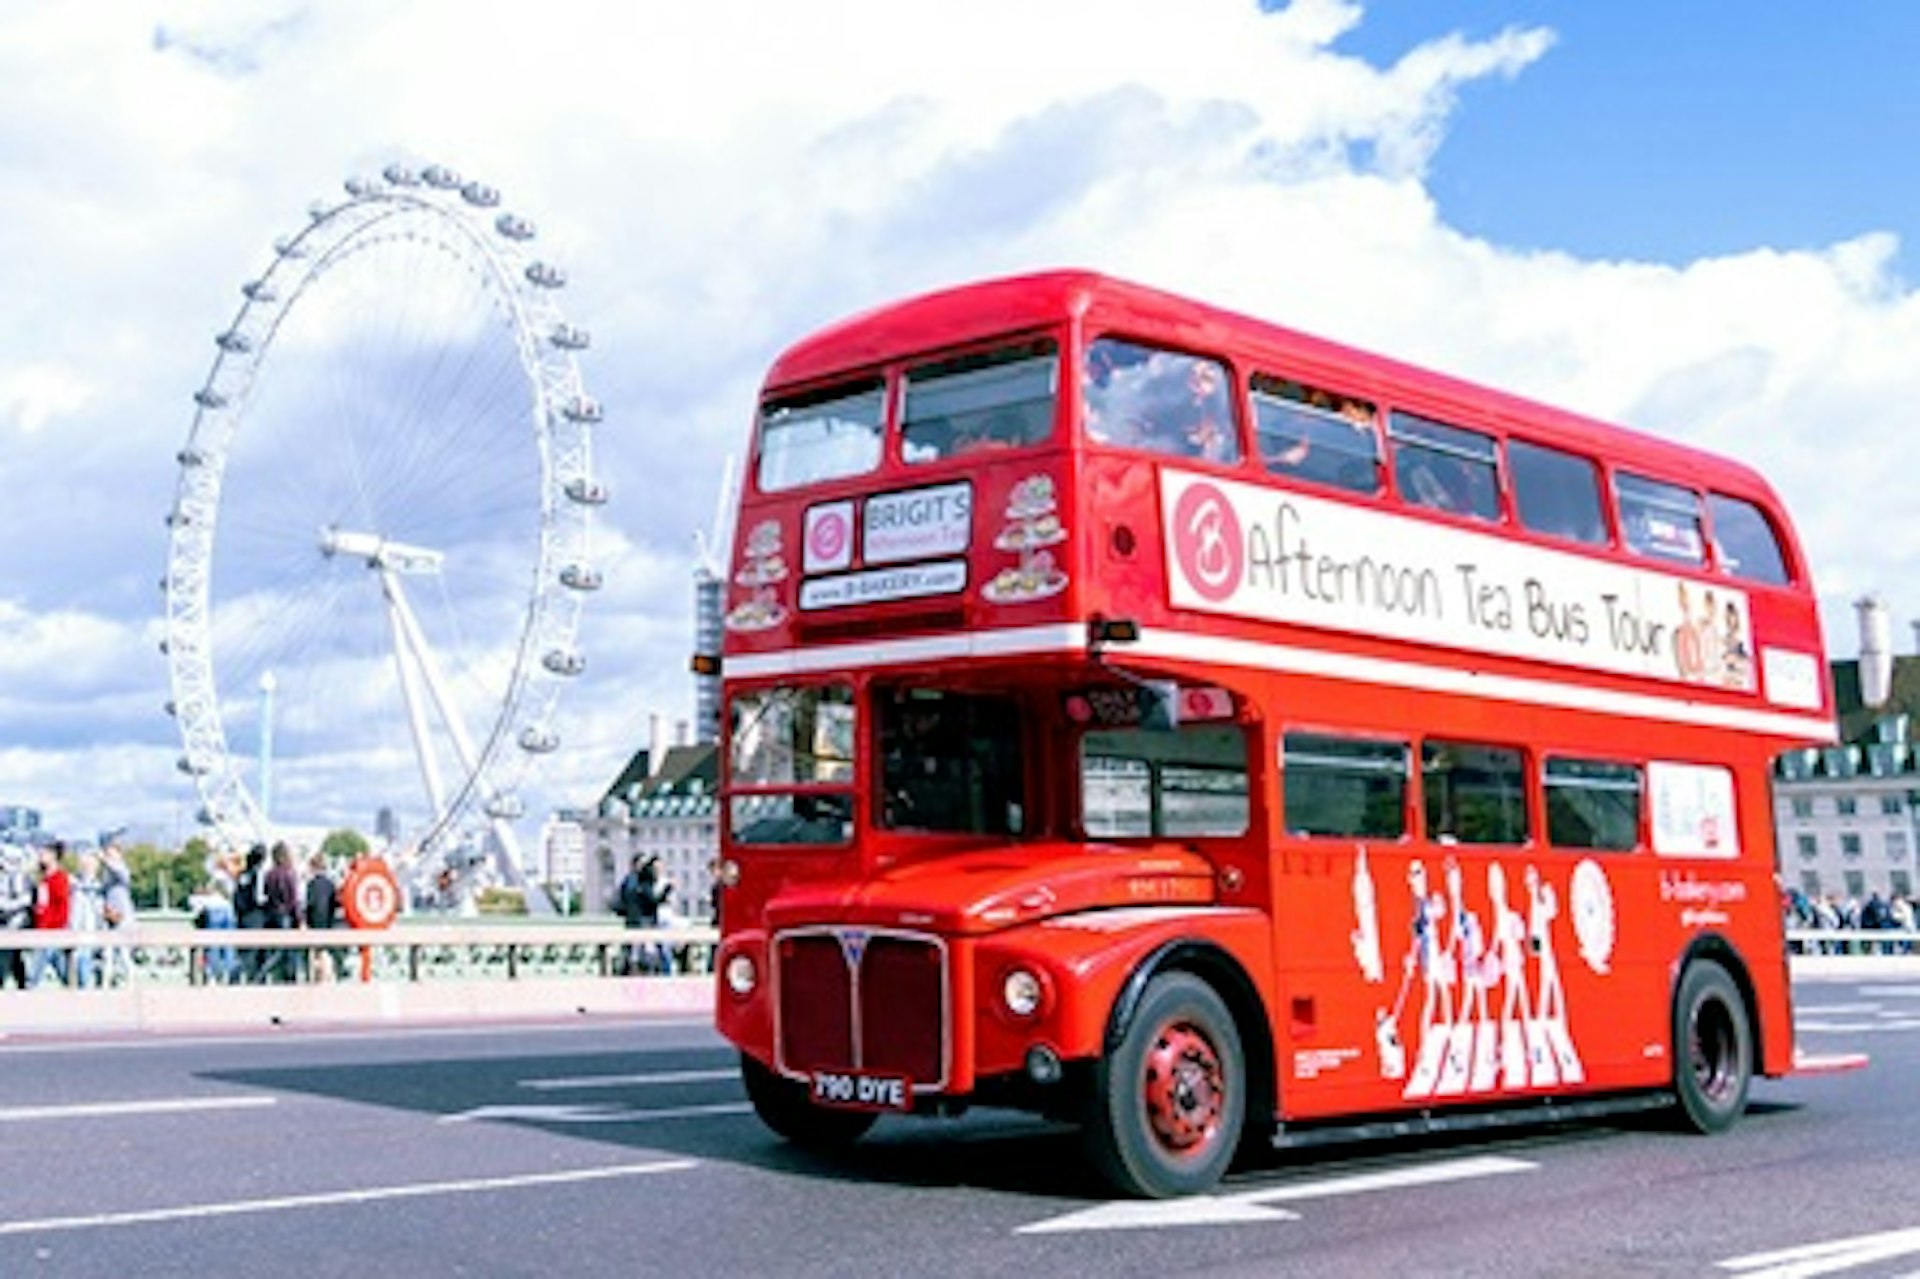 Vintage Afternoon Tea Bus in London for Two with B Bakery 1